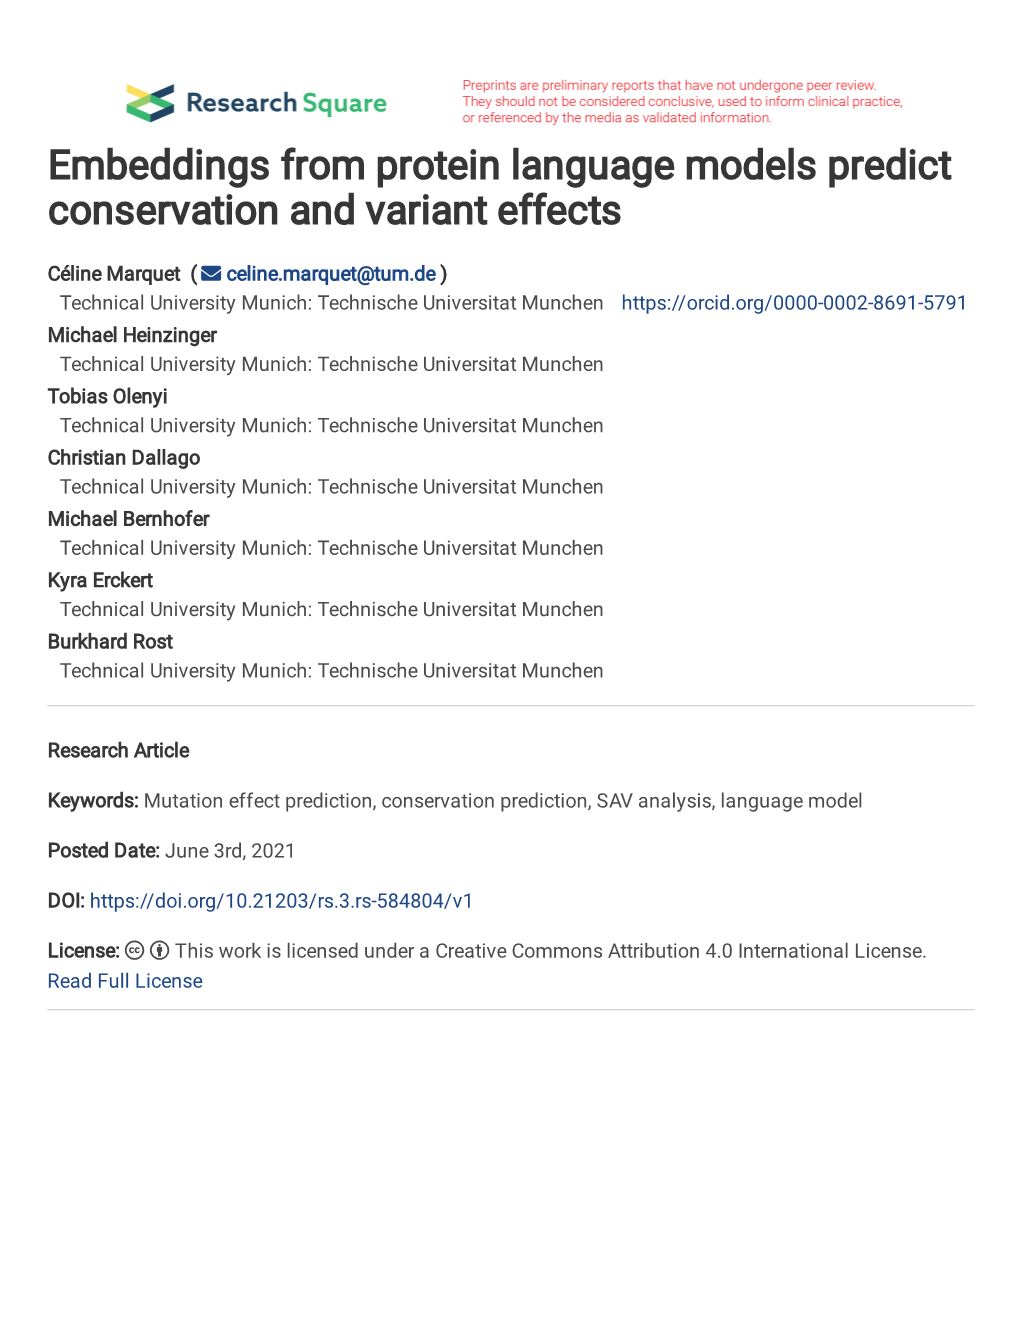 Embeddings from Protein Language Models Predict Conservation and Variant Effects